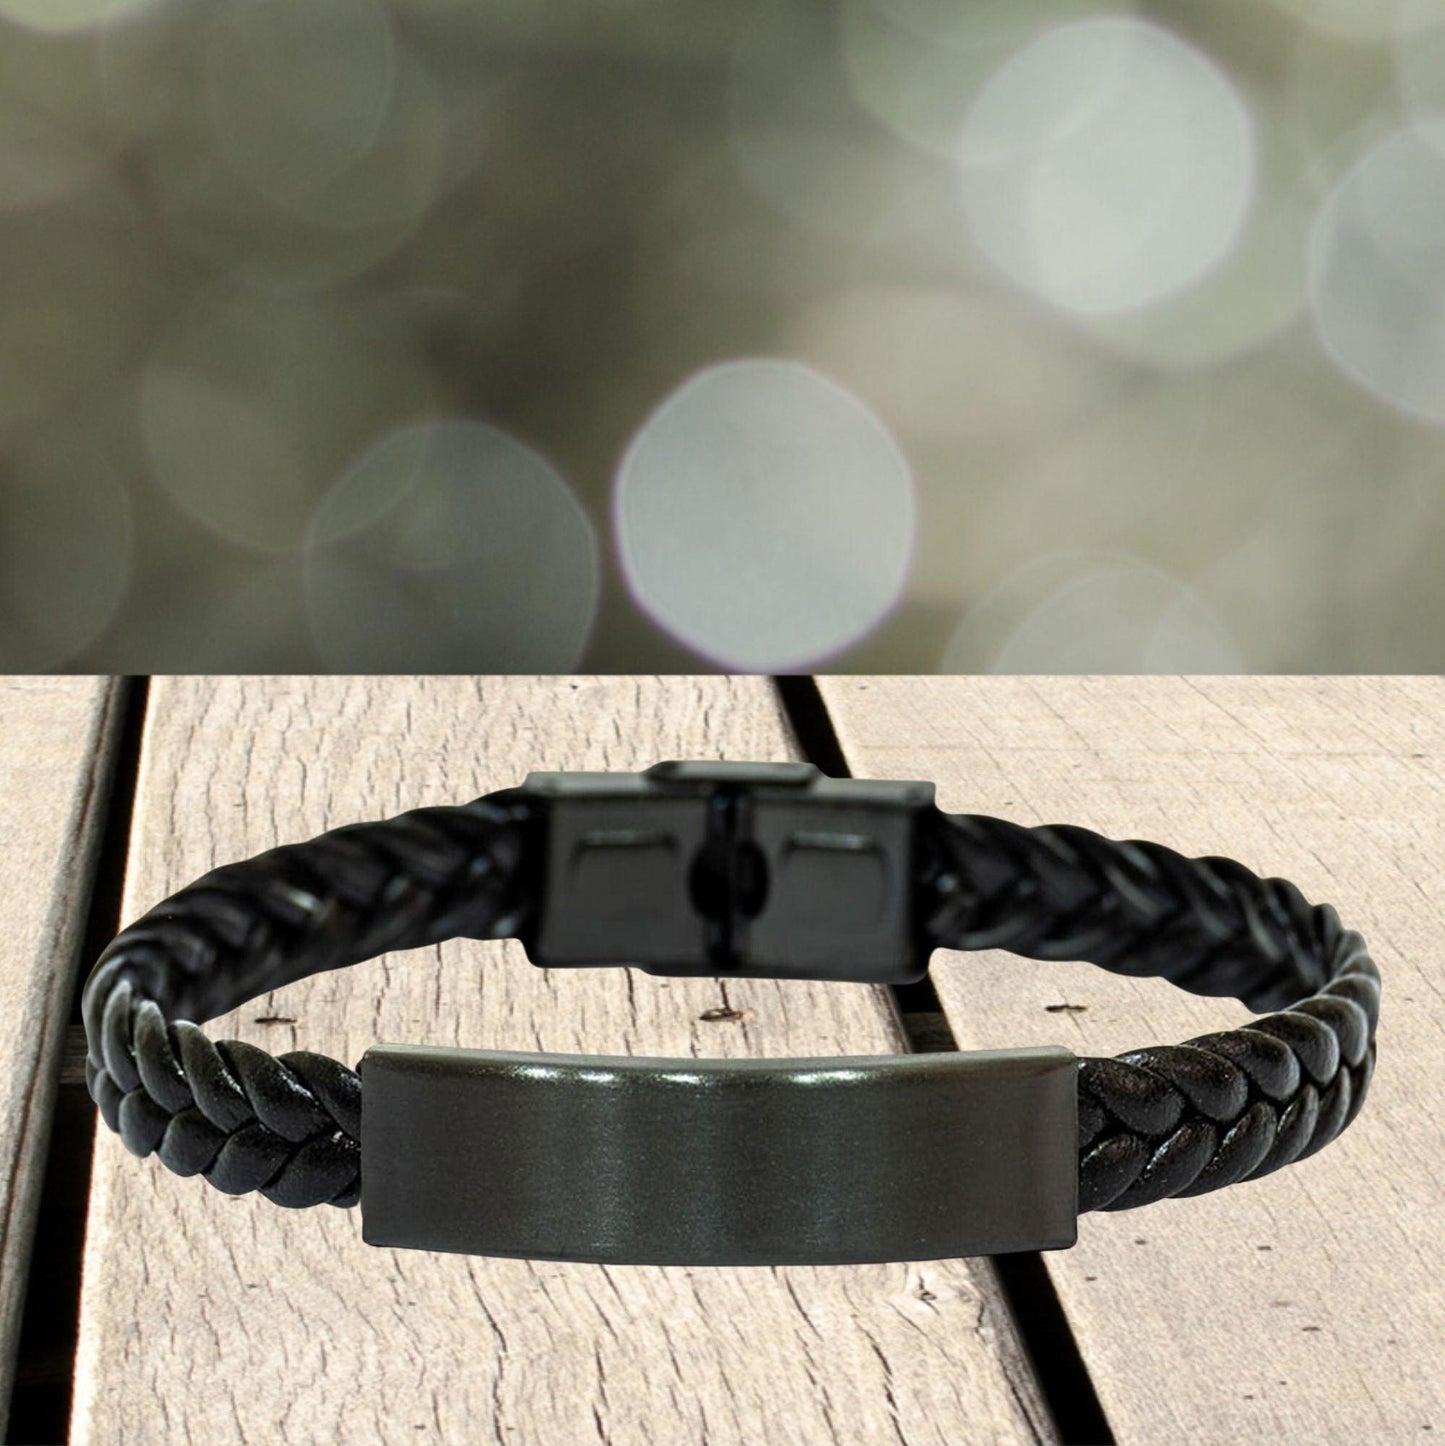 Goddaughter Christmas Perfect Gifts, Goddaughter Braided Leather Bracelet, Motivational Goddaughter Engraved Gifts, Birthday Gifts For Goddaughter, To My Goddaughter Life is learning to dance in the rain, finding good in each day. I'm always with you - Mallard Moon Gift Shop